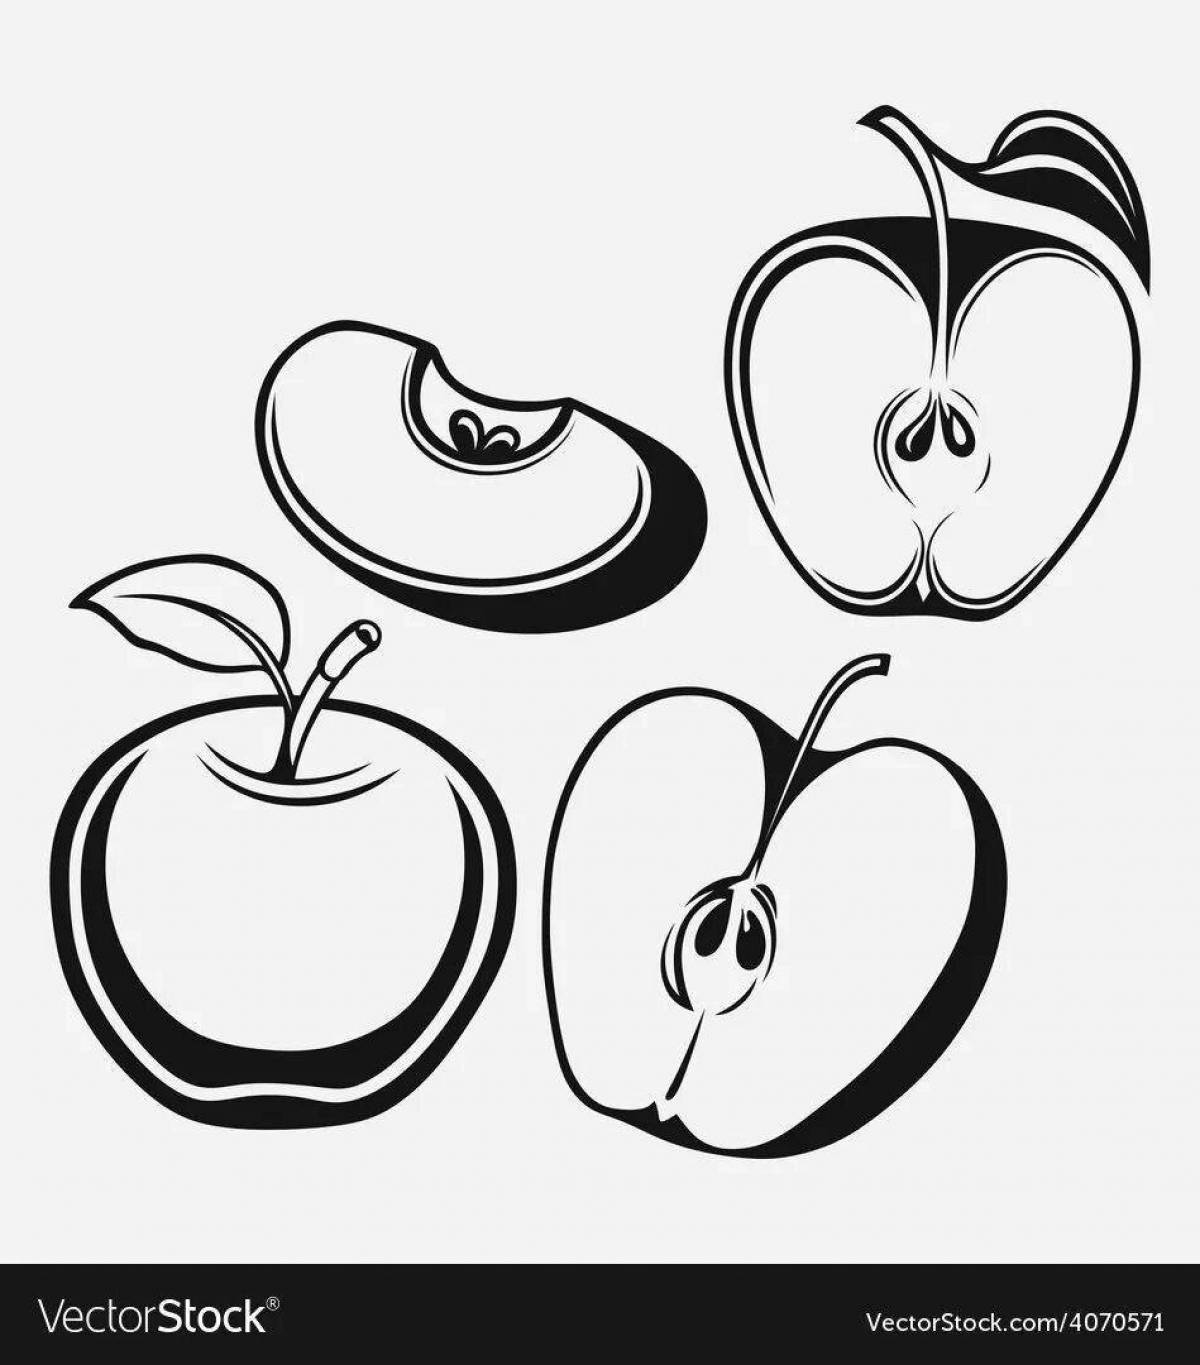 Crunchy apple coloring page